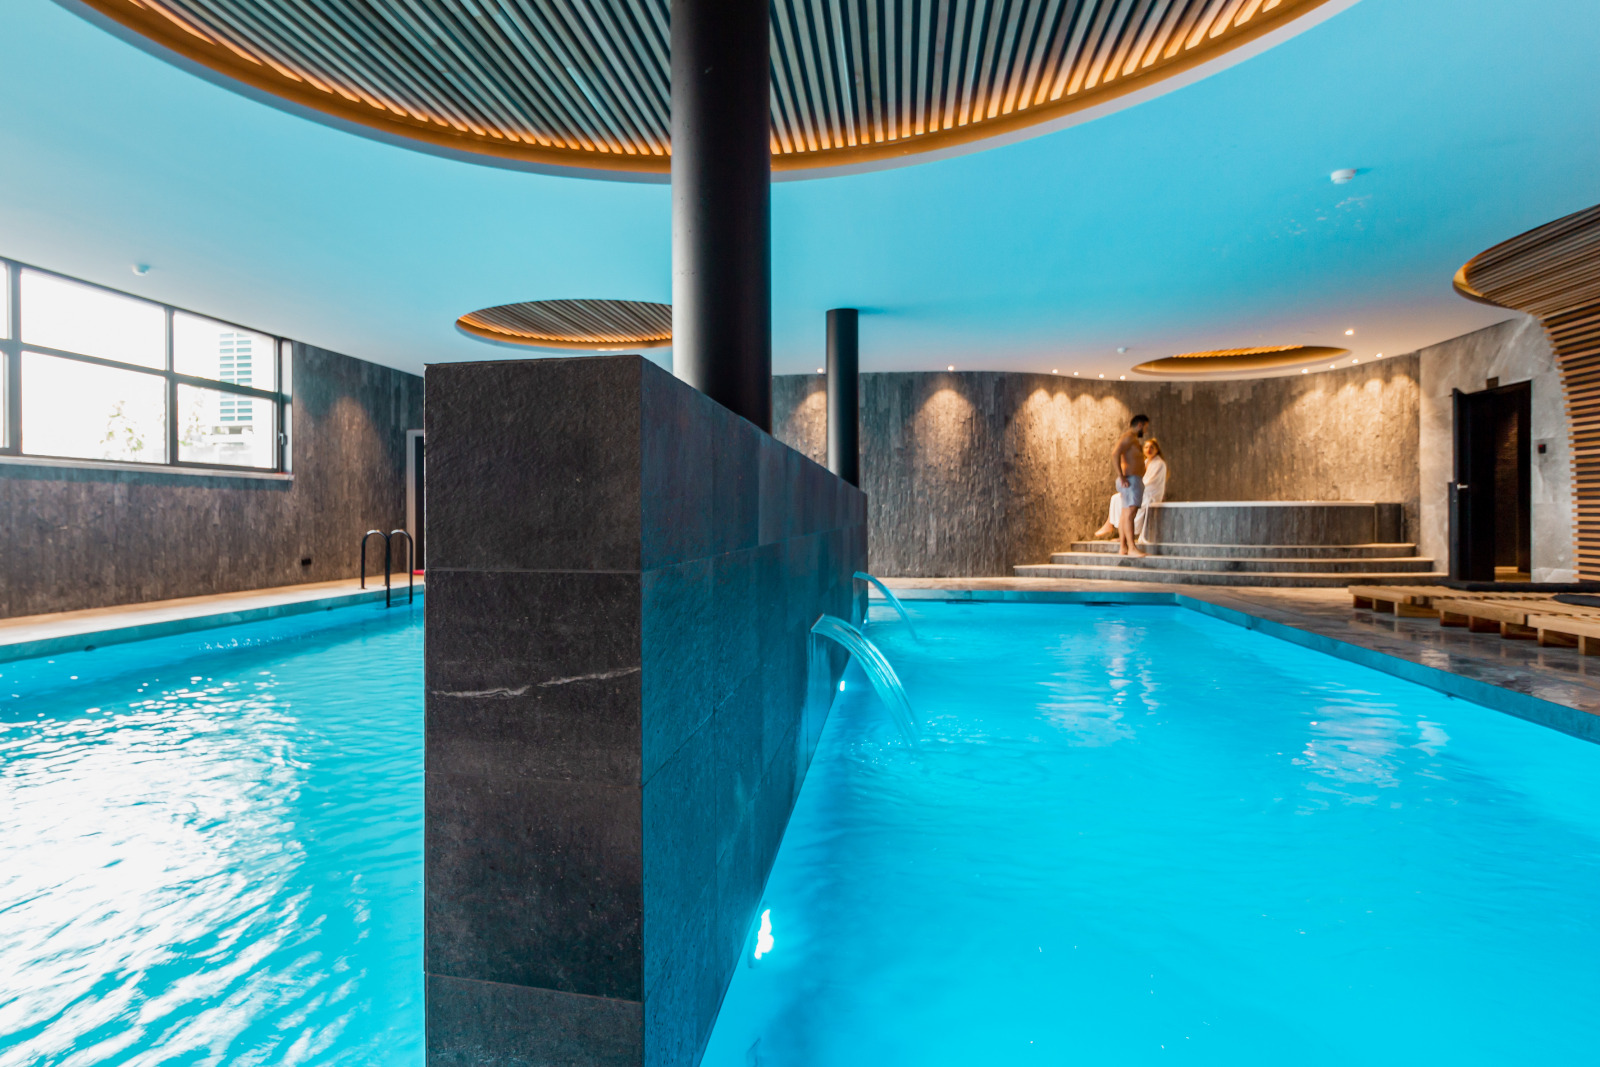 Swimming pool of the Van der Valk Congres & Spa hotel in Mons